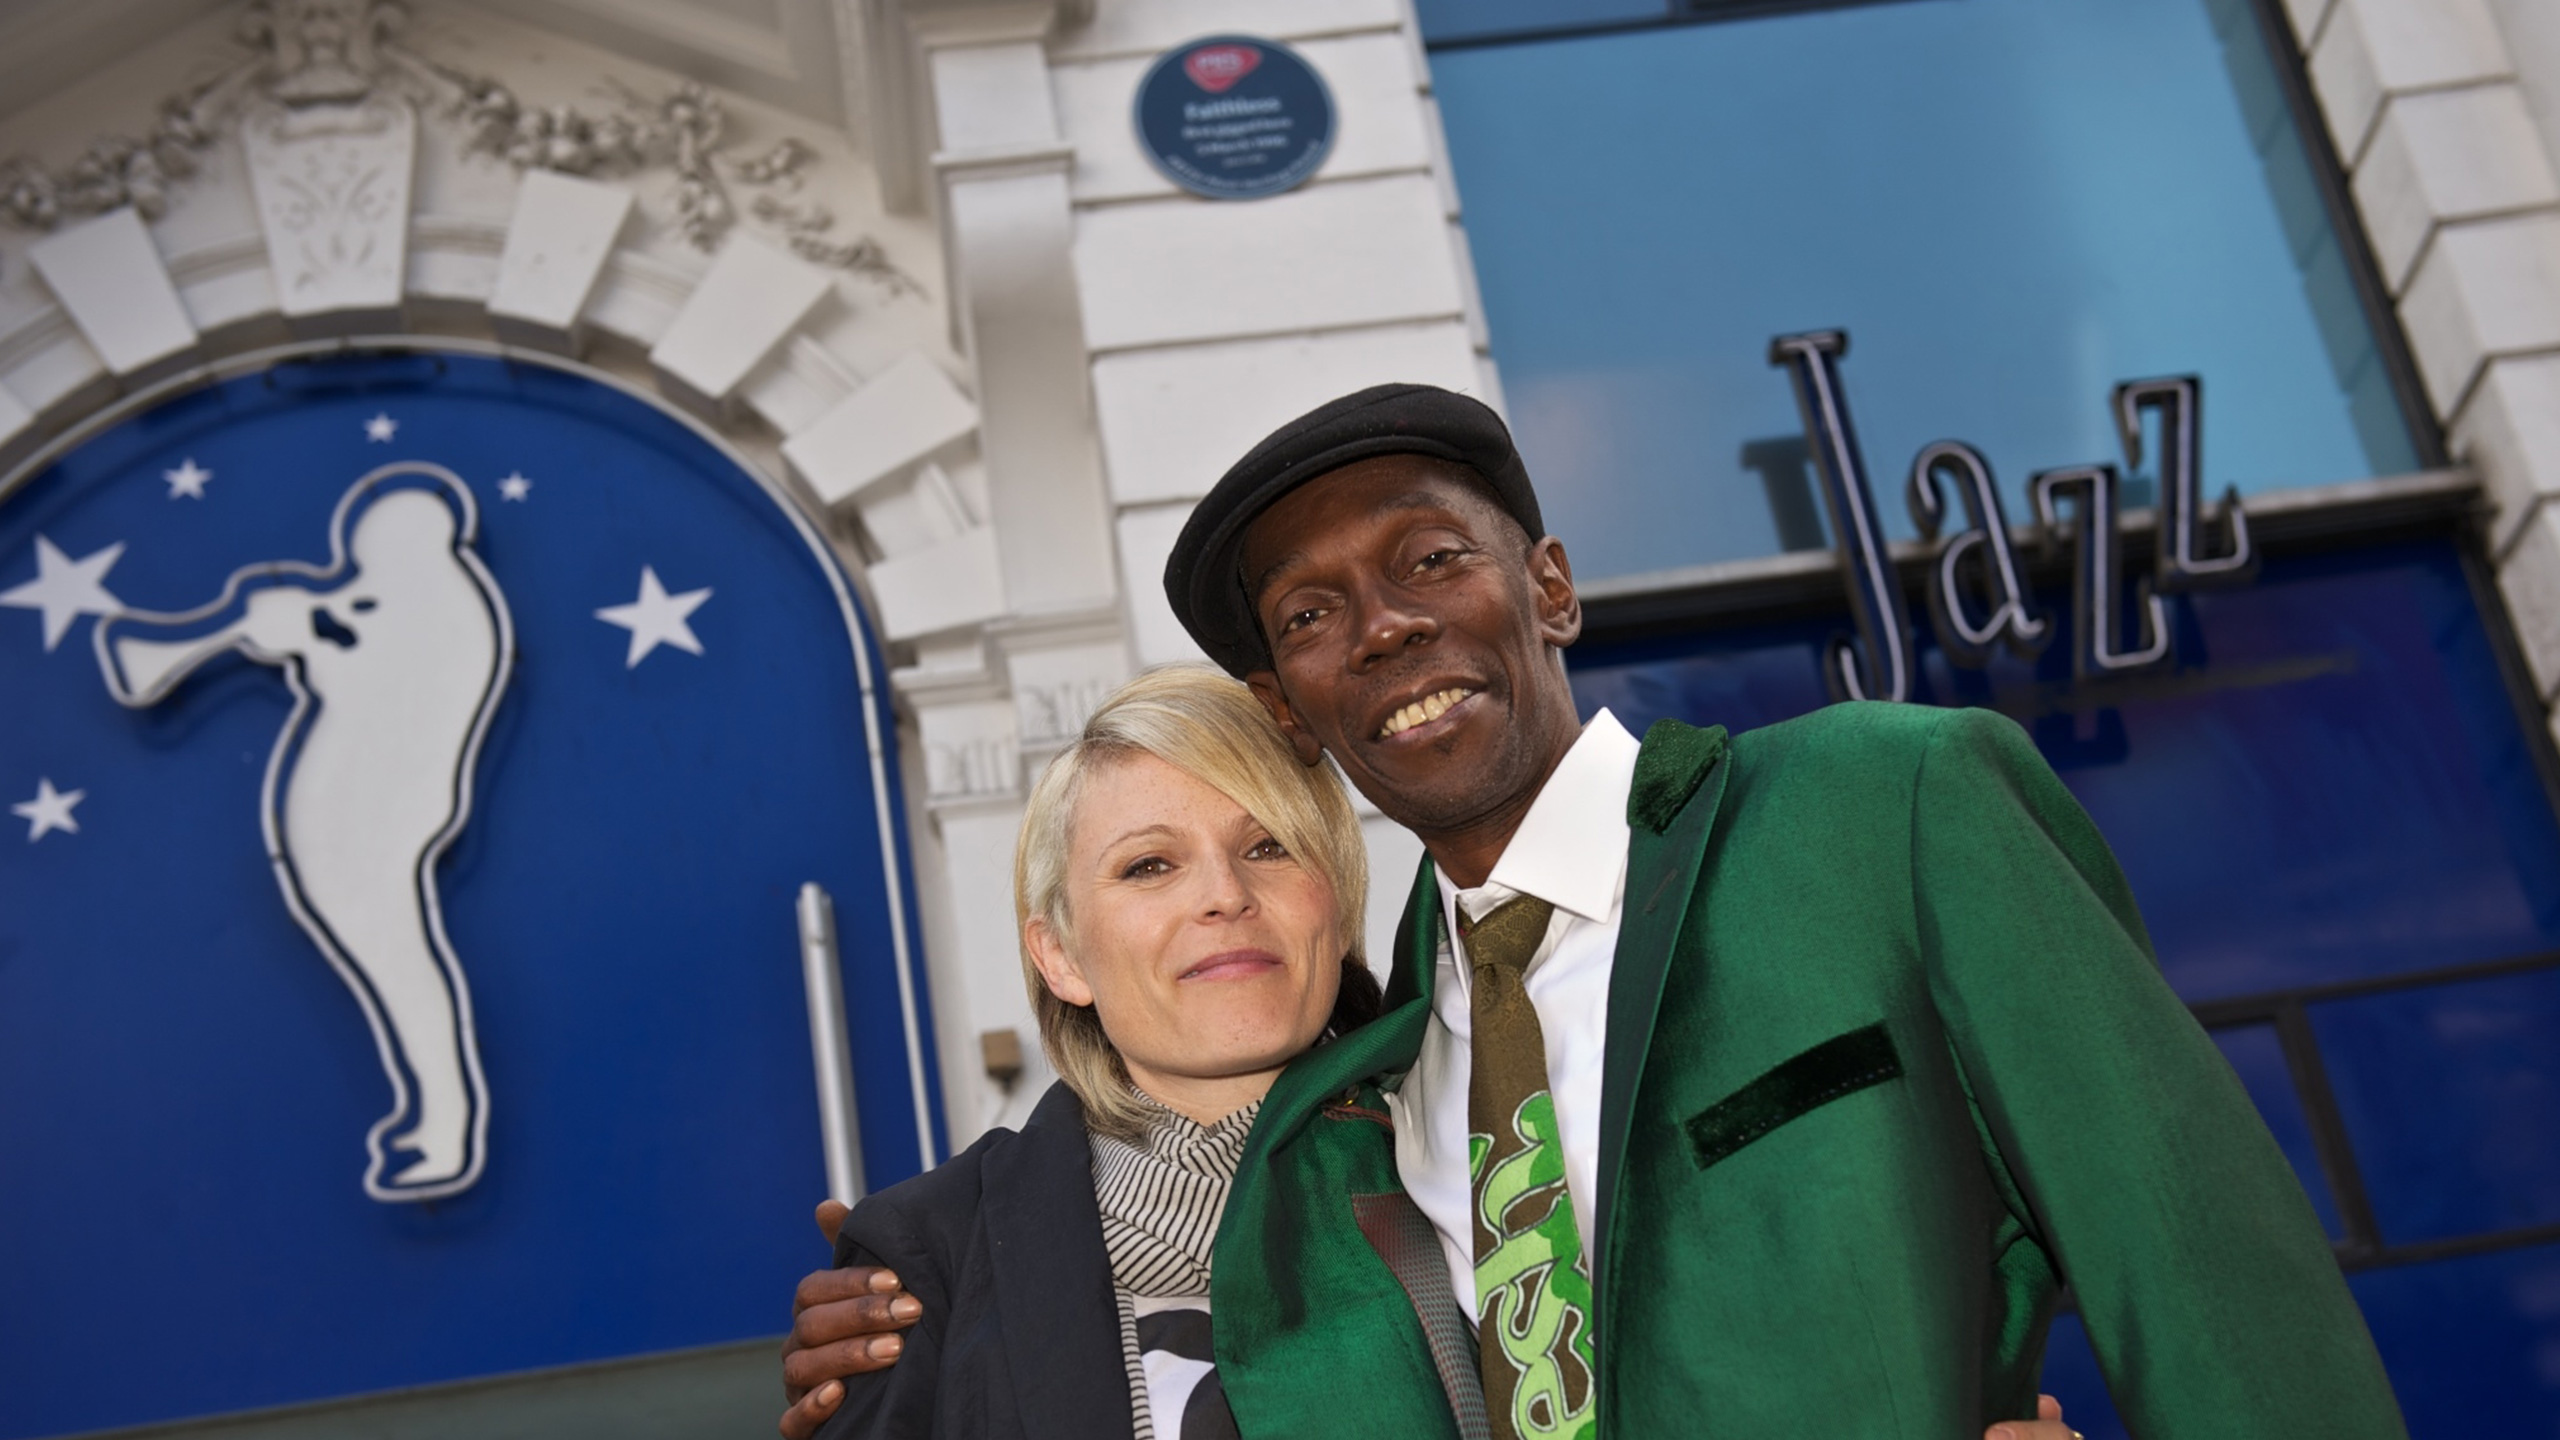 Sister Bliss and Maxi Jazz of Faithless with the Jazz Cafe's Heritage Award plaque